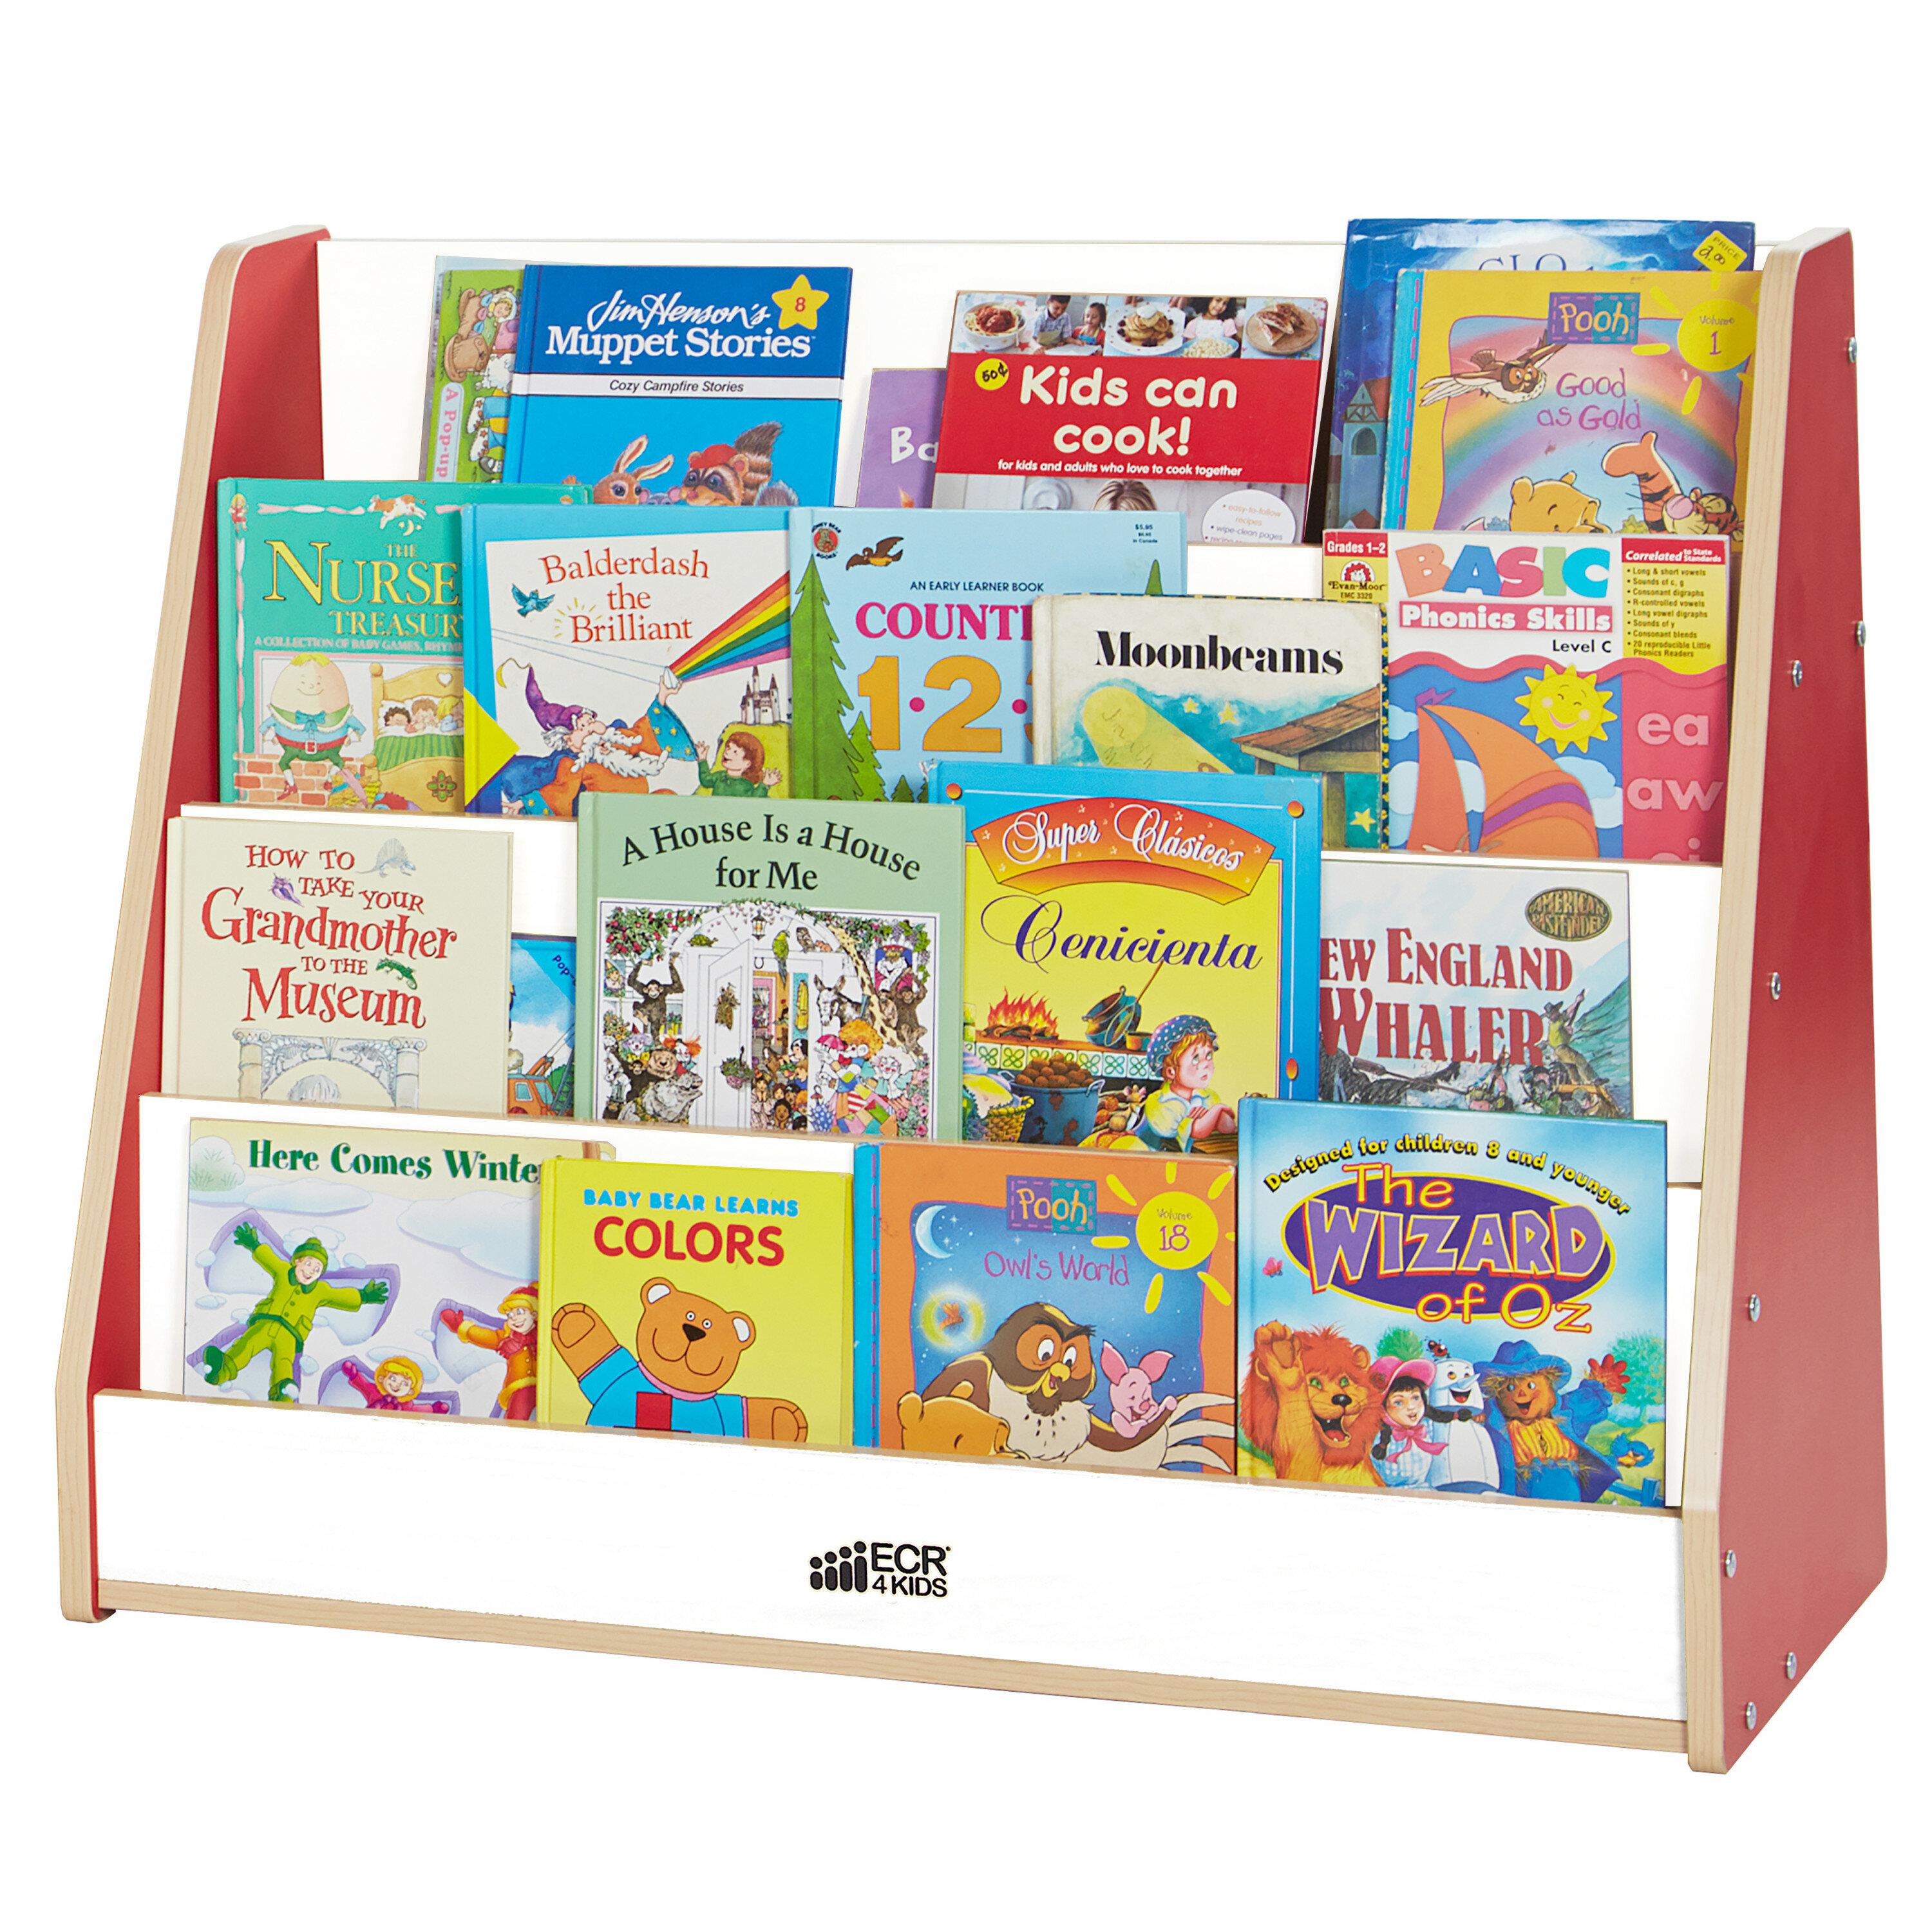 Colorful Essentials Big Book Display Stand at Tomorrows Classroom